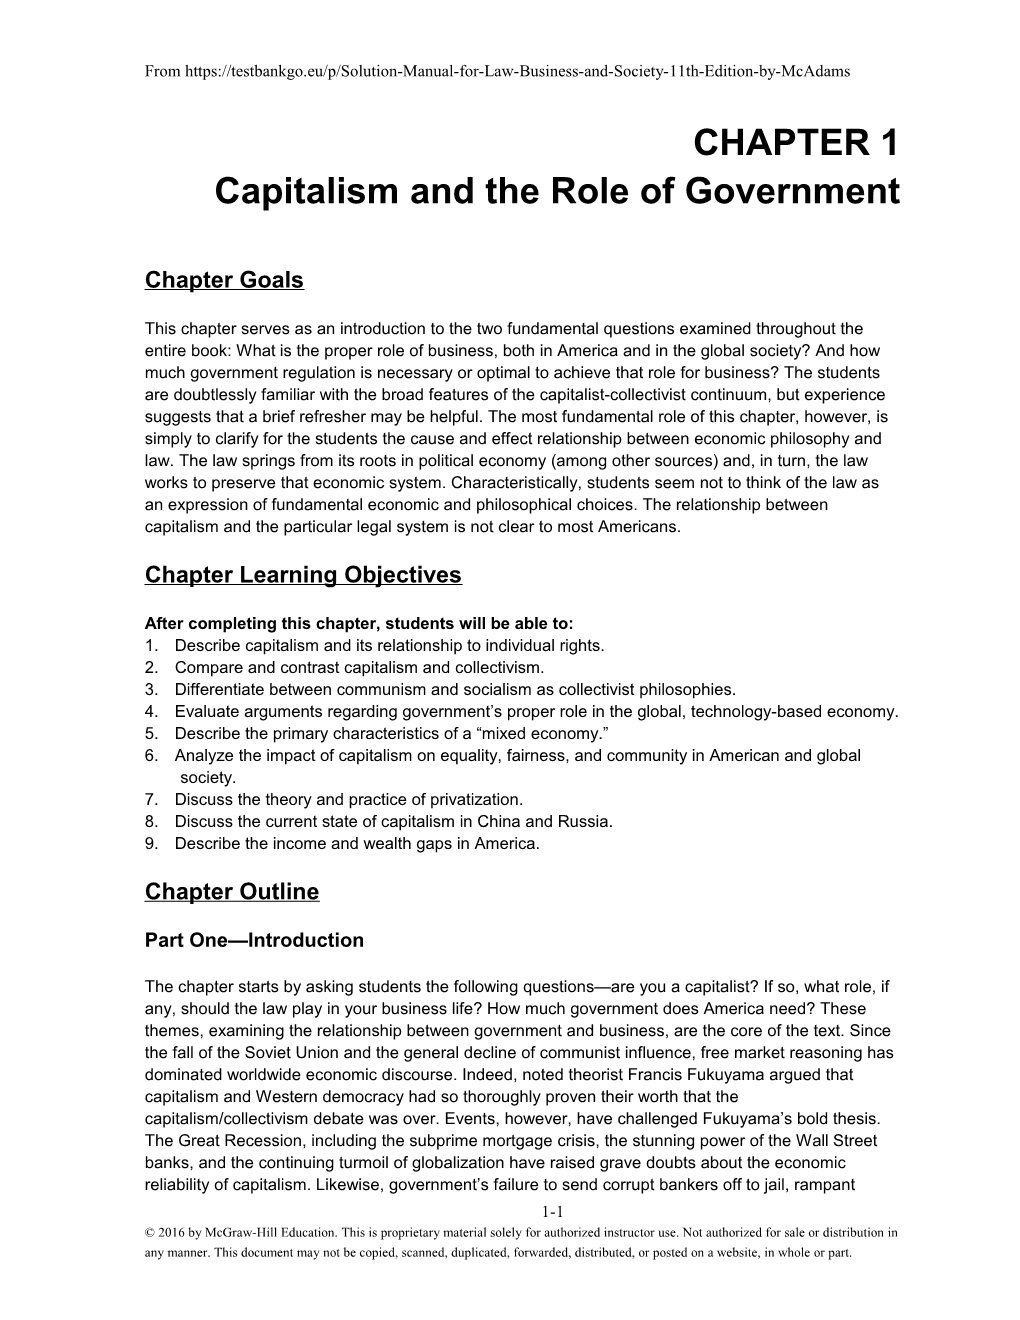 Capitalism and the Role of Government